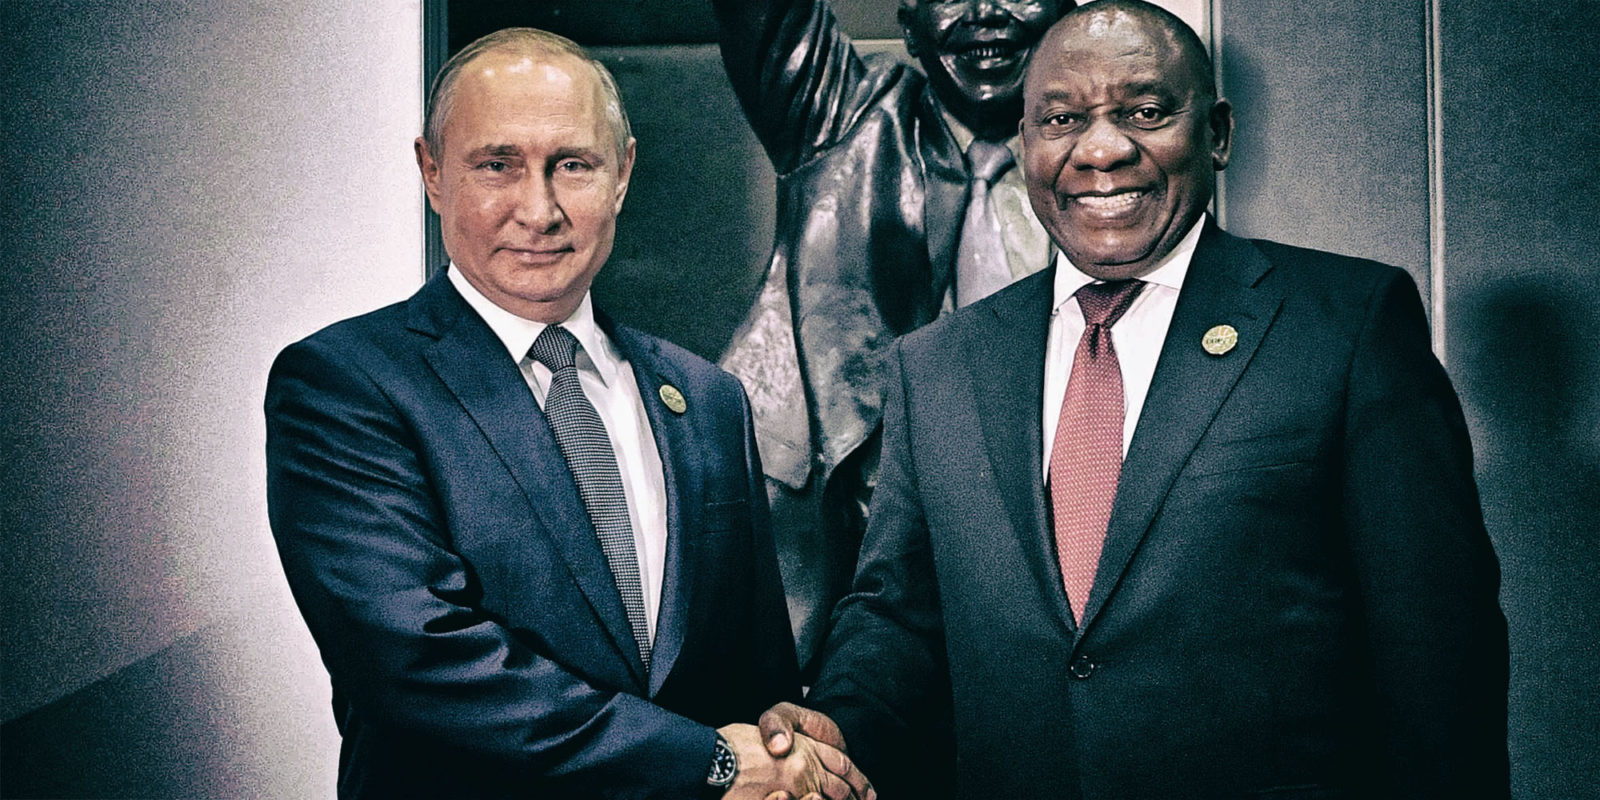 Putin to be arrested if he visits South Africa, opposition leader warns